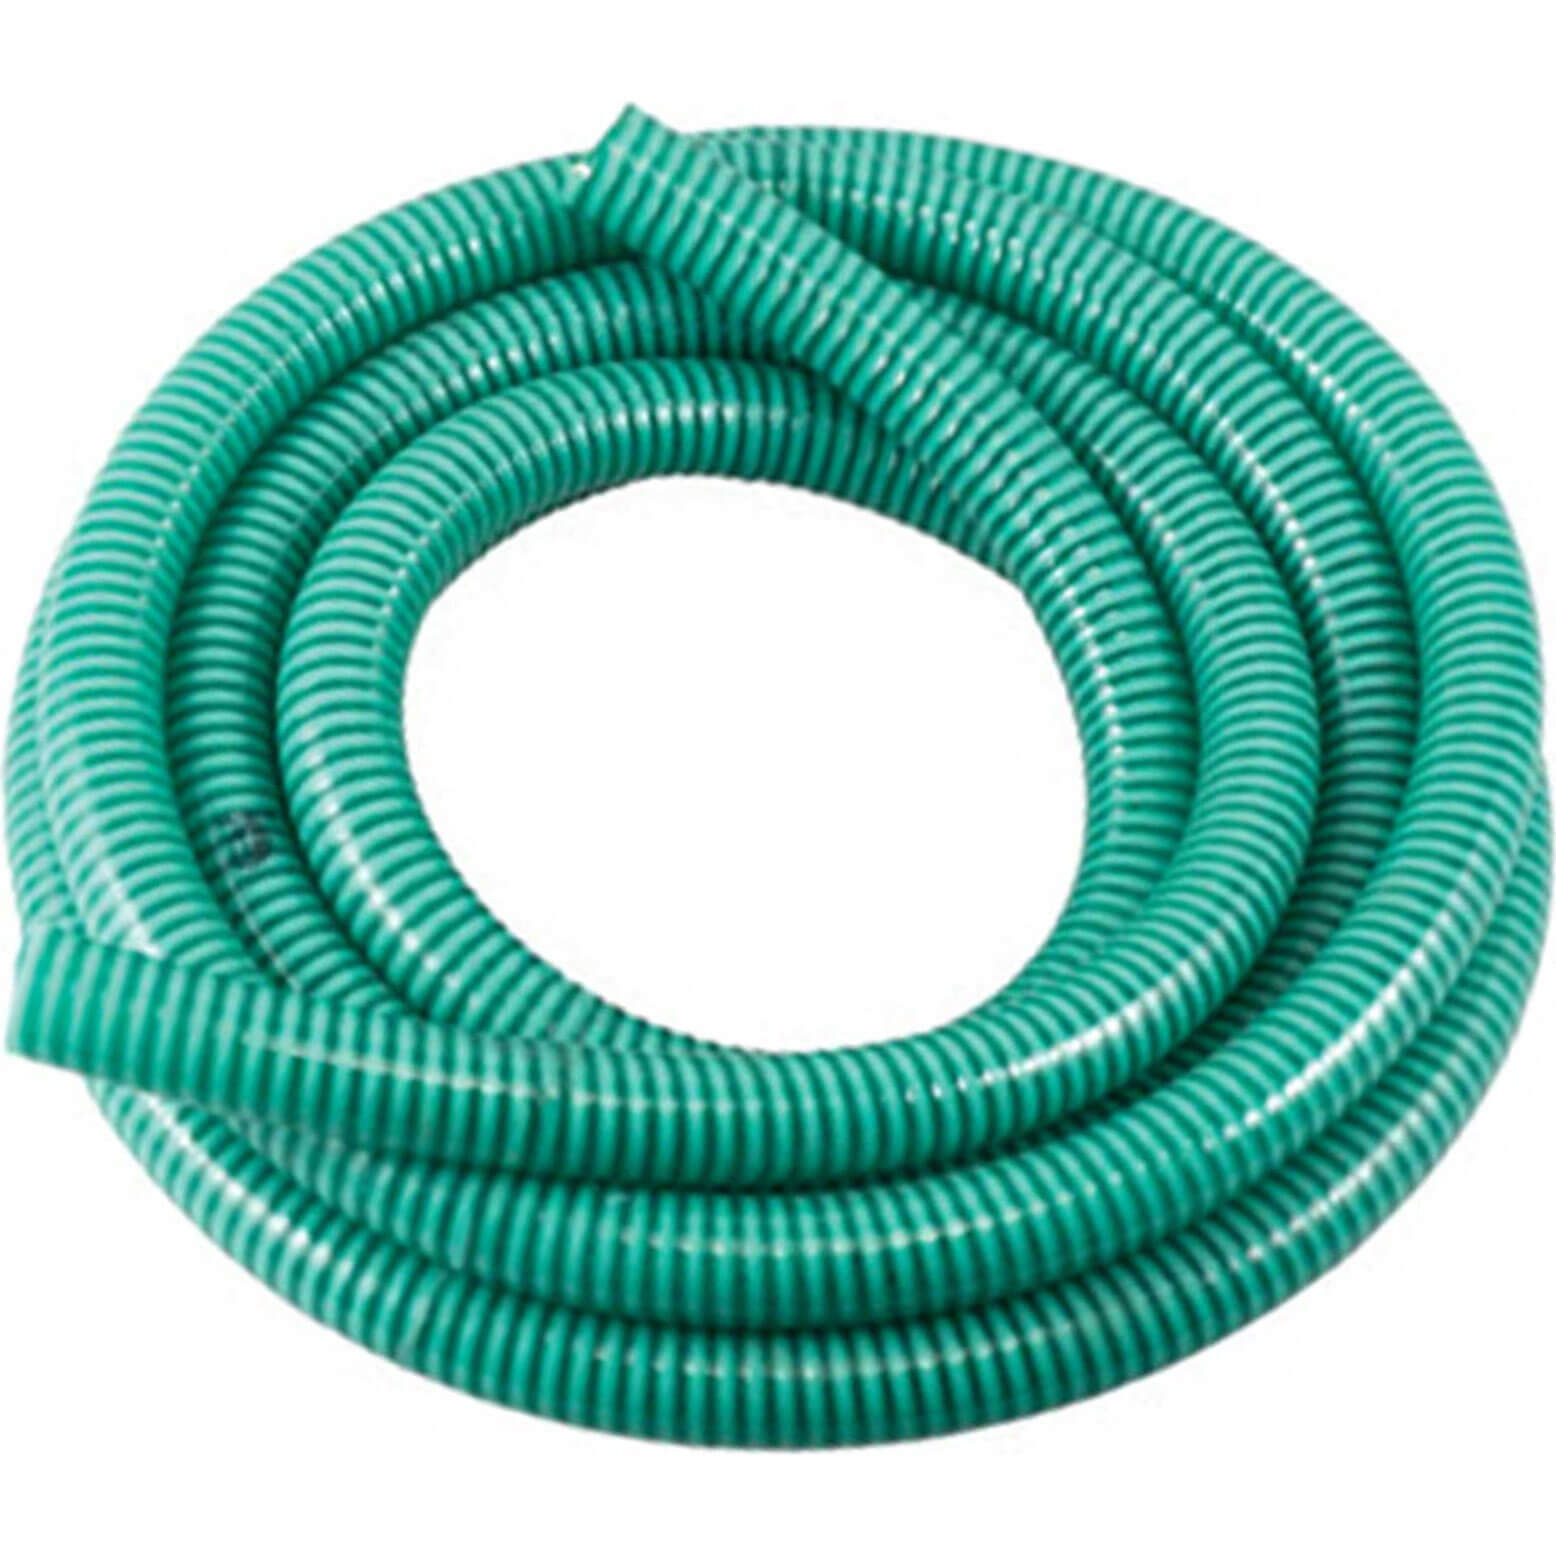 Image of Sirius Water Pump Suction Hose 25mm 5m